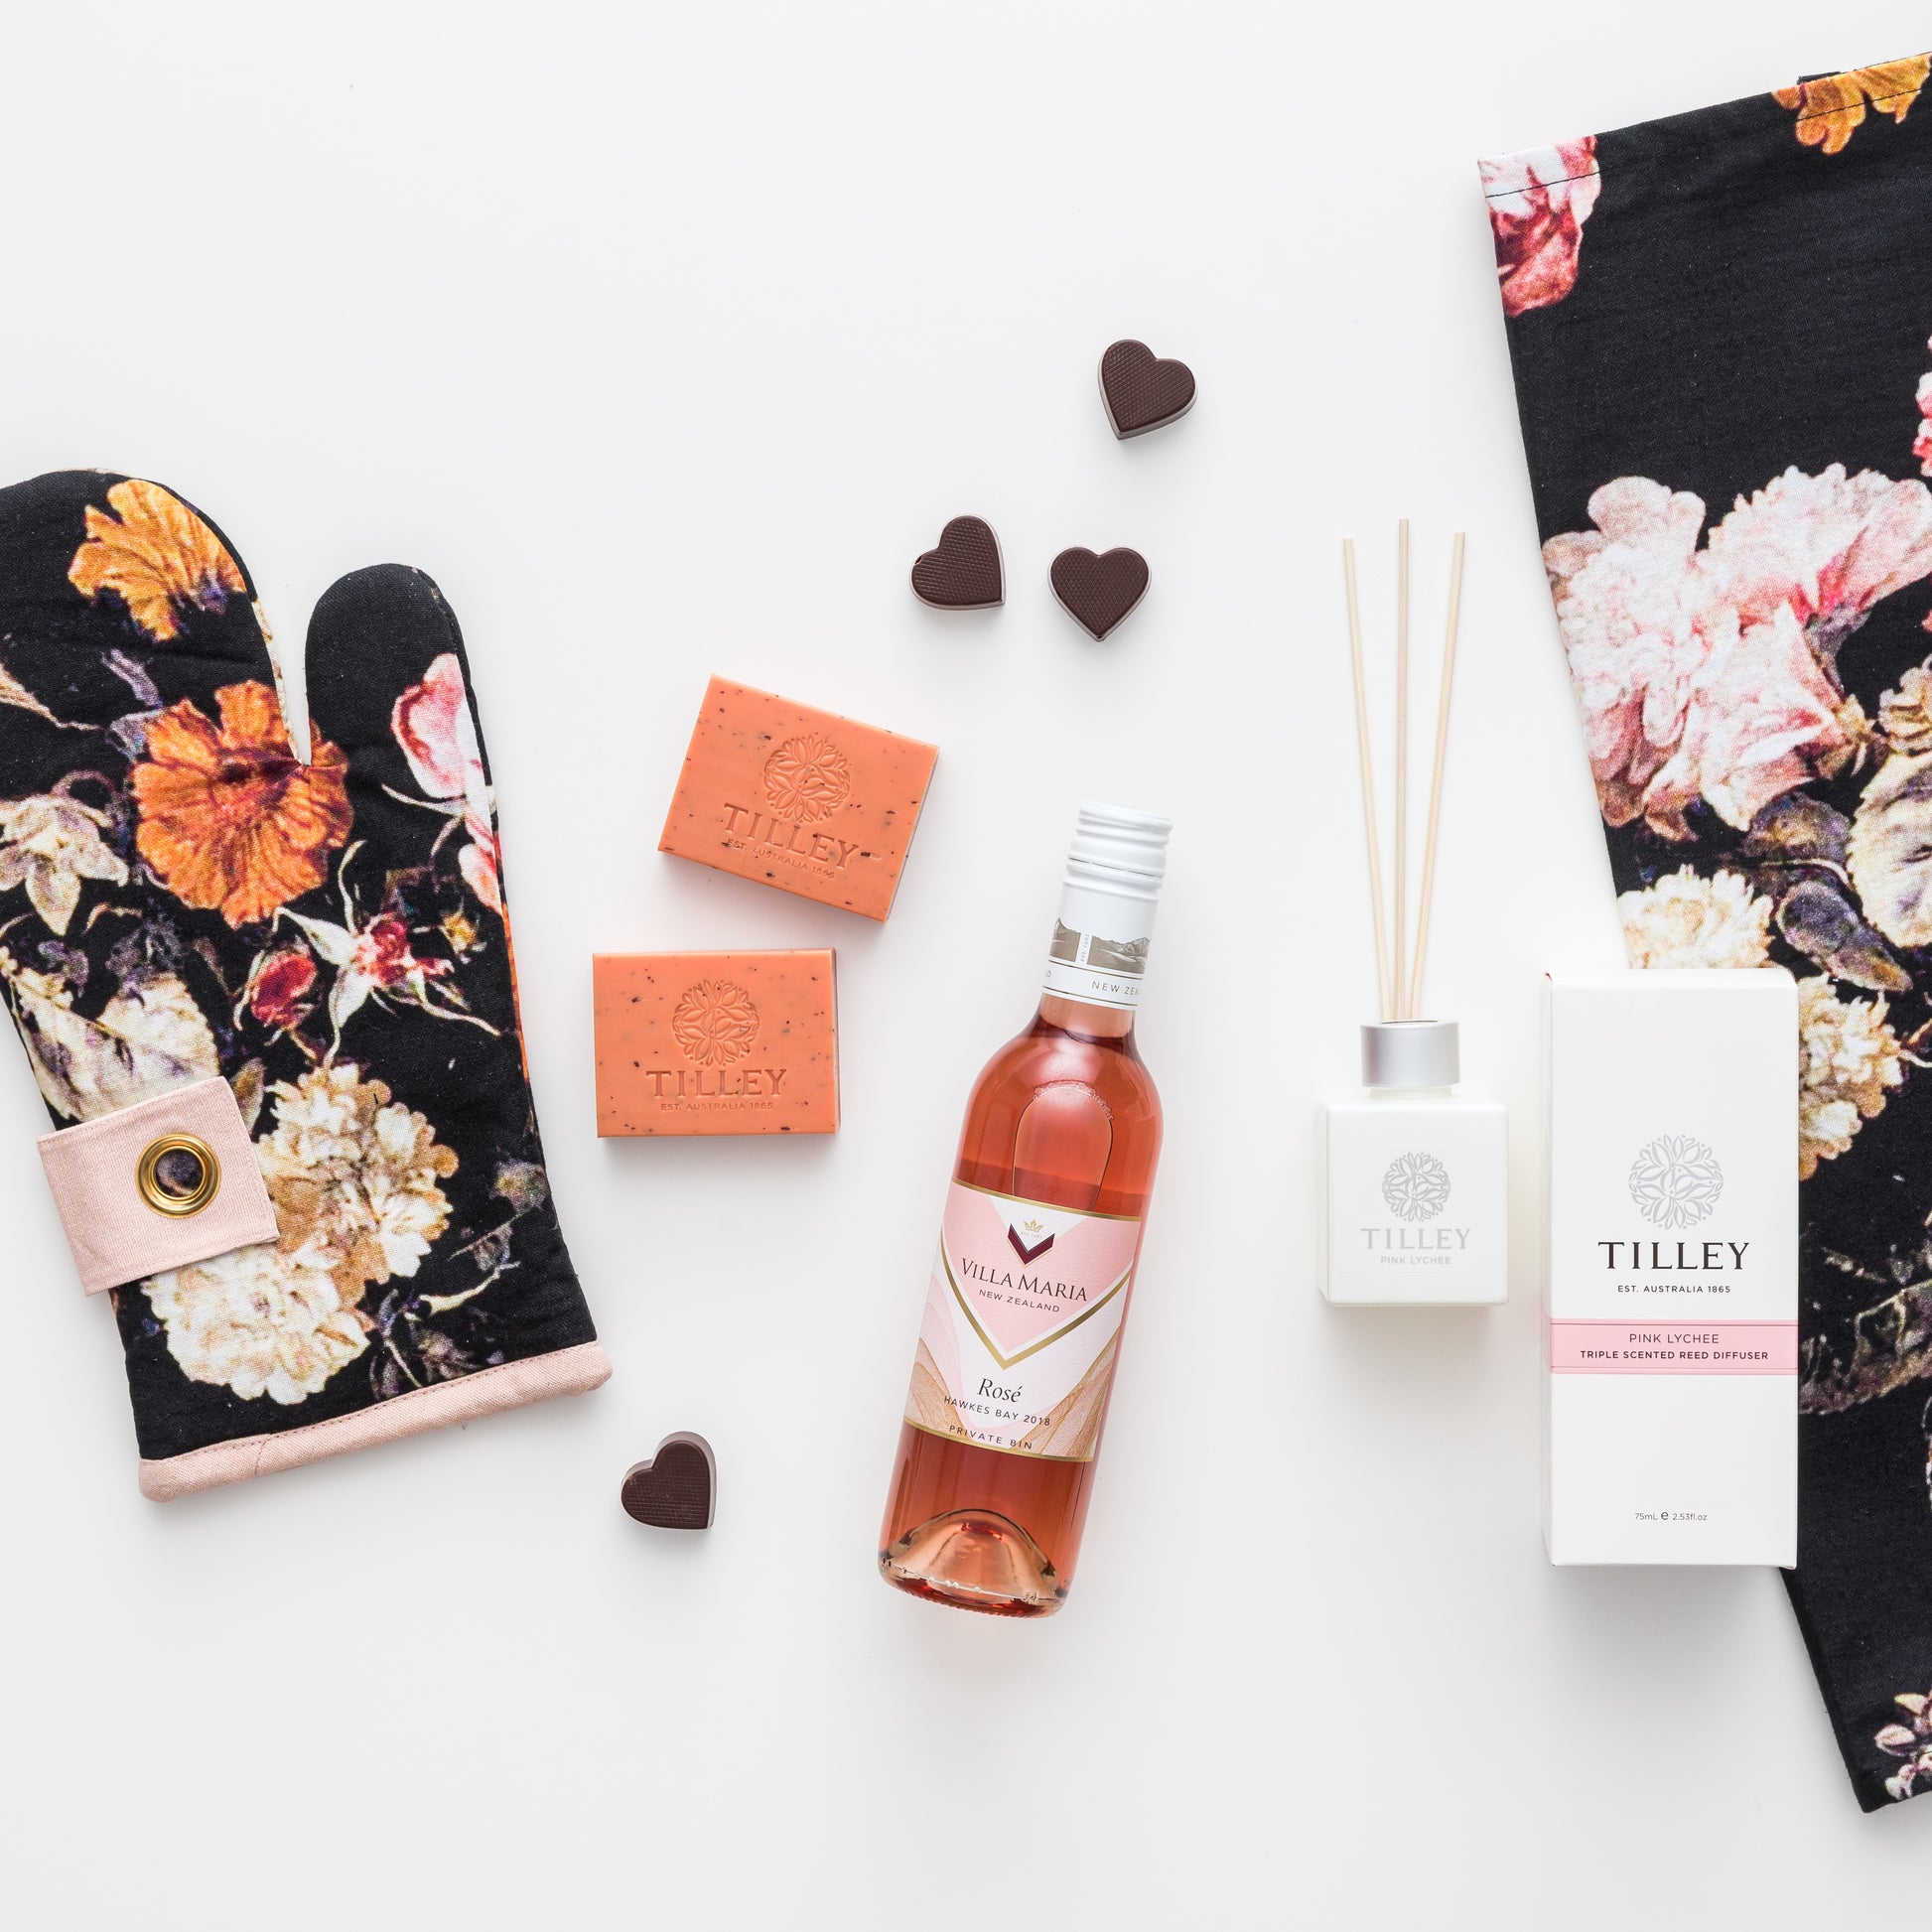 Products featured out of gift box are rose wine, chocolate, reed diffuser, oven mitt, tea towel, soap.